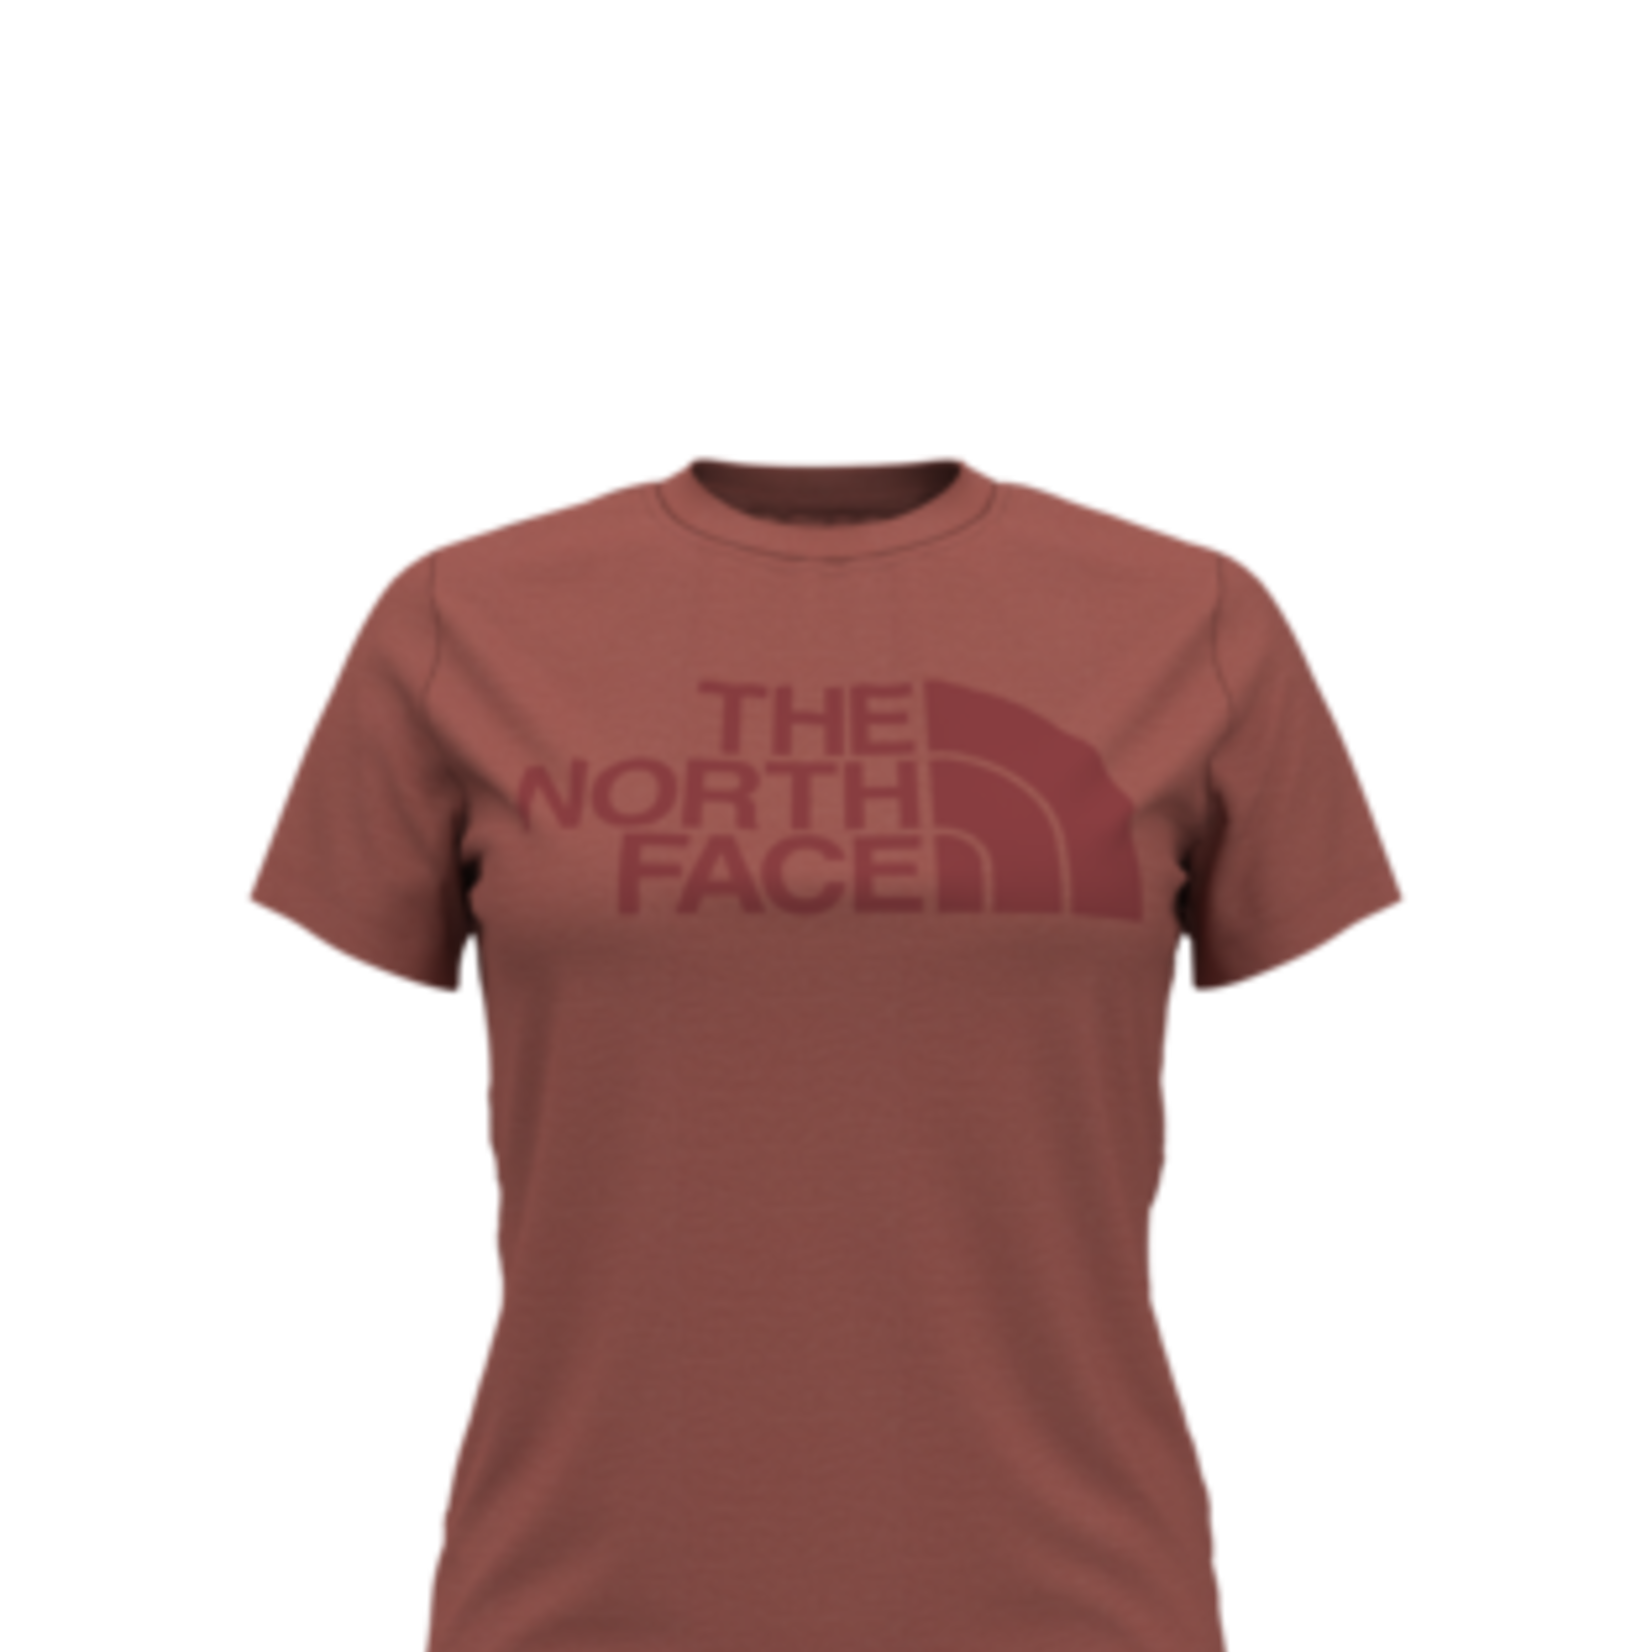 The North Face The North Face T-Shirt, SS Half Dome Tri-Blend, Ladies